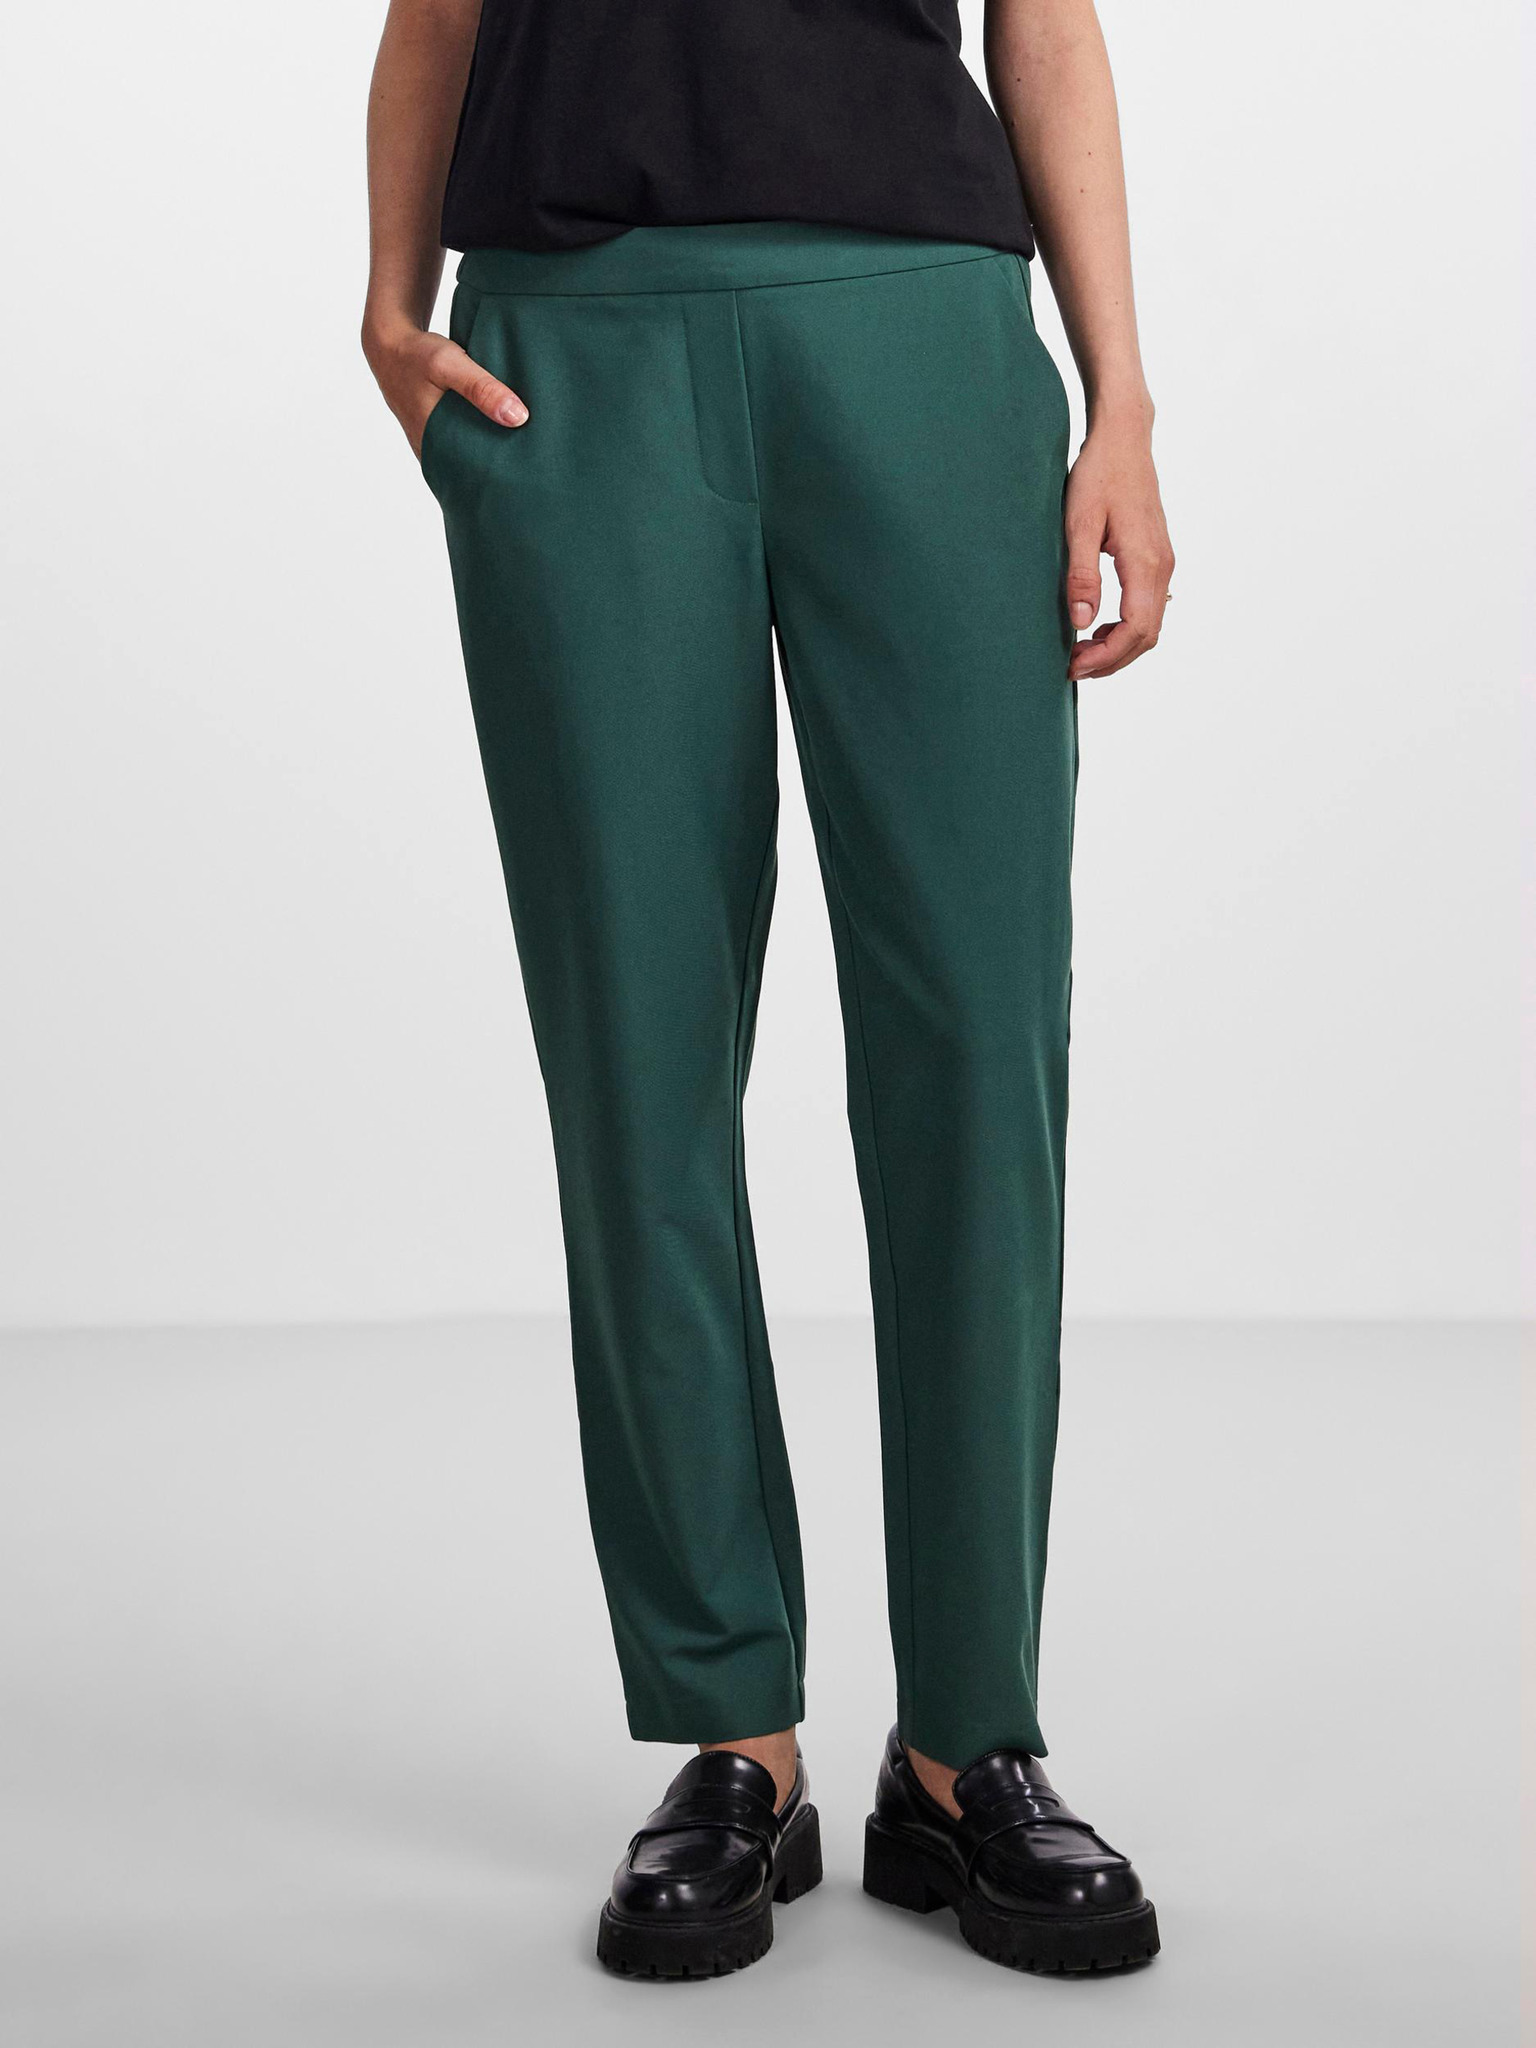 Buy Dark Green Trousers & Pants for Women by Brucella Online | Ajio.com